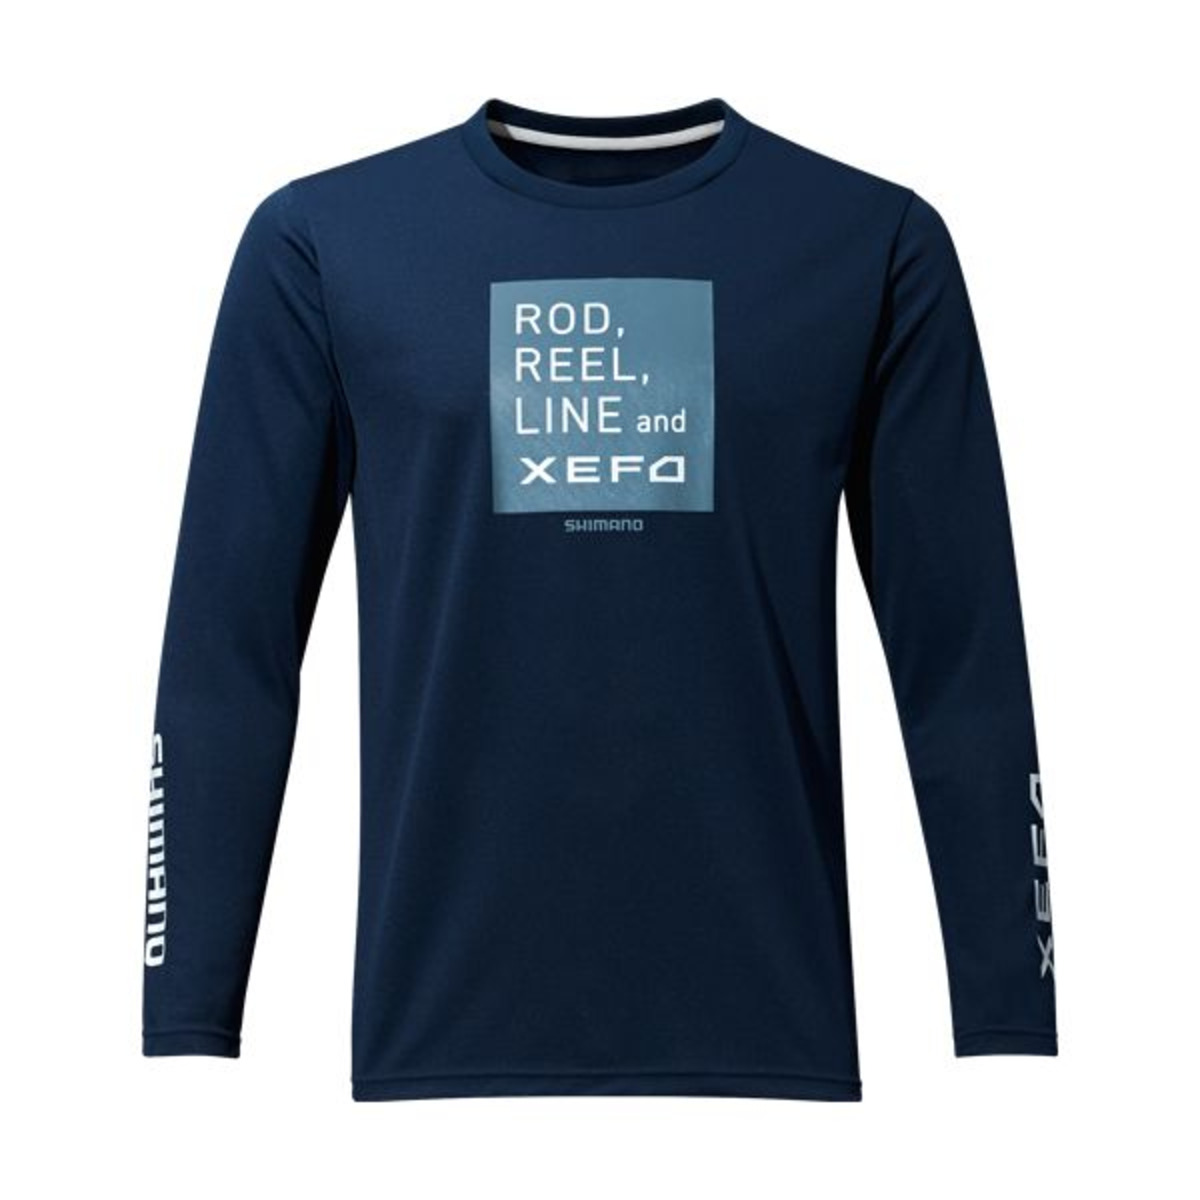 Shimano T-Shirt Manches Longues Xefo - M - Navy